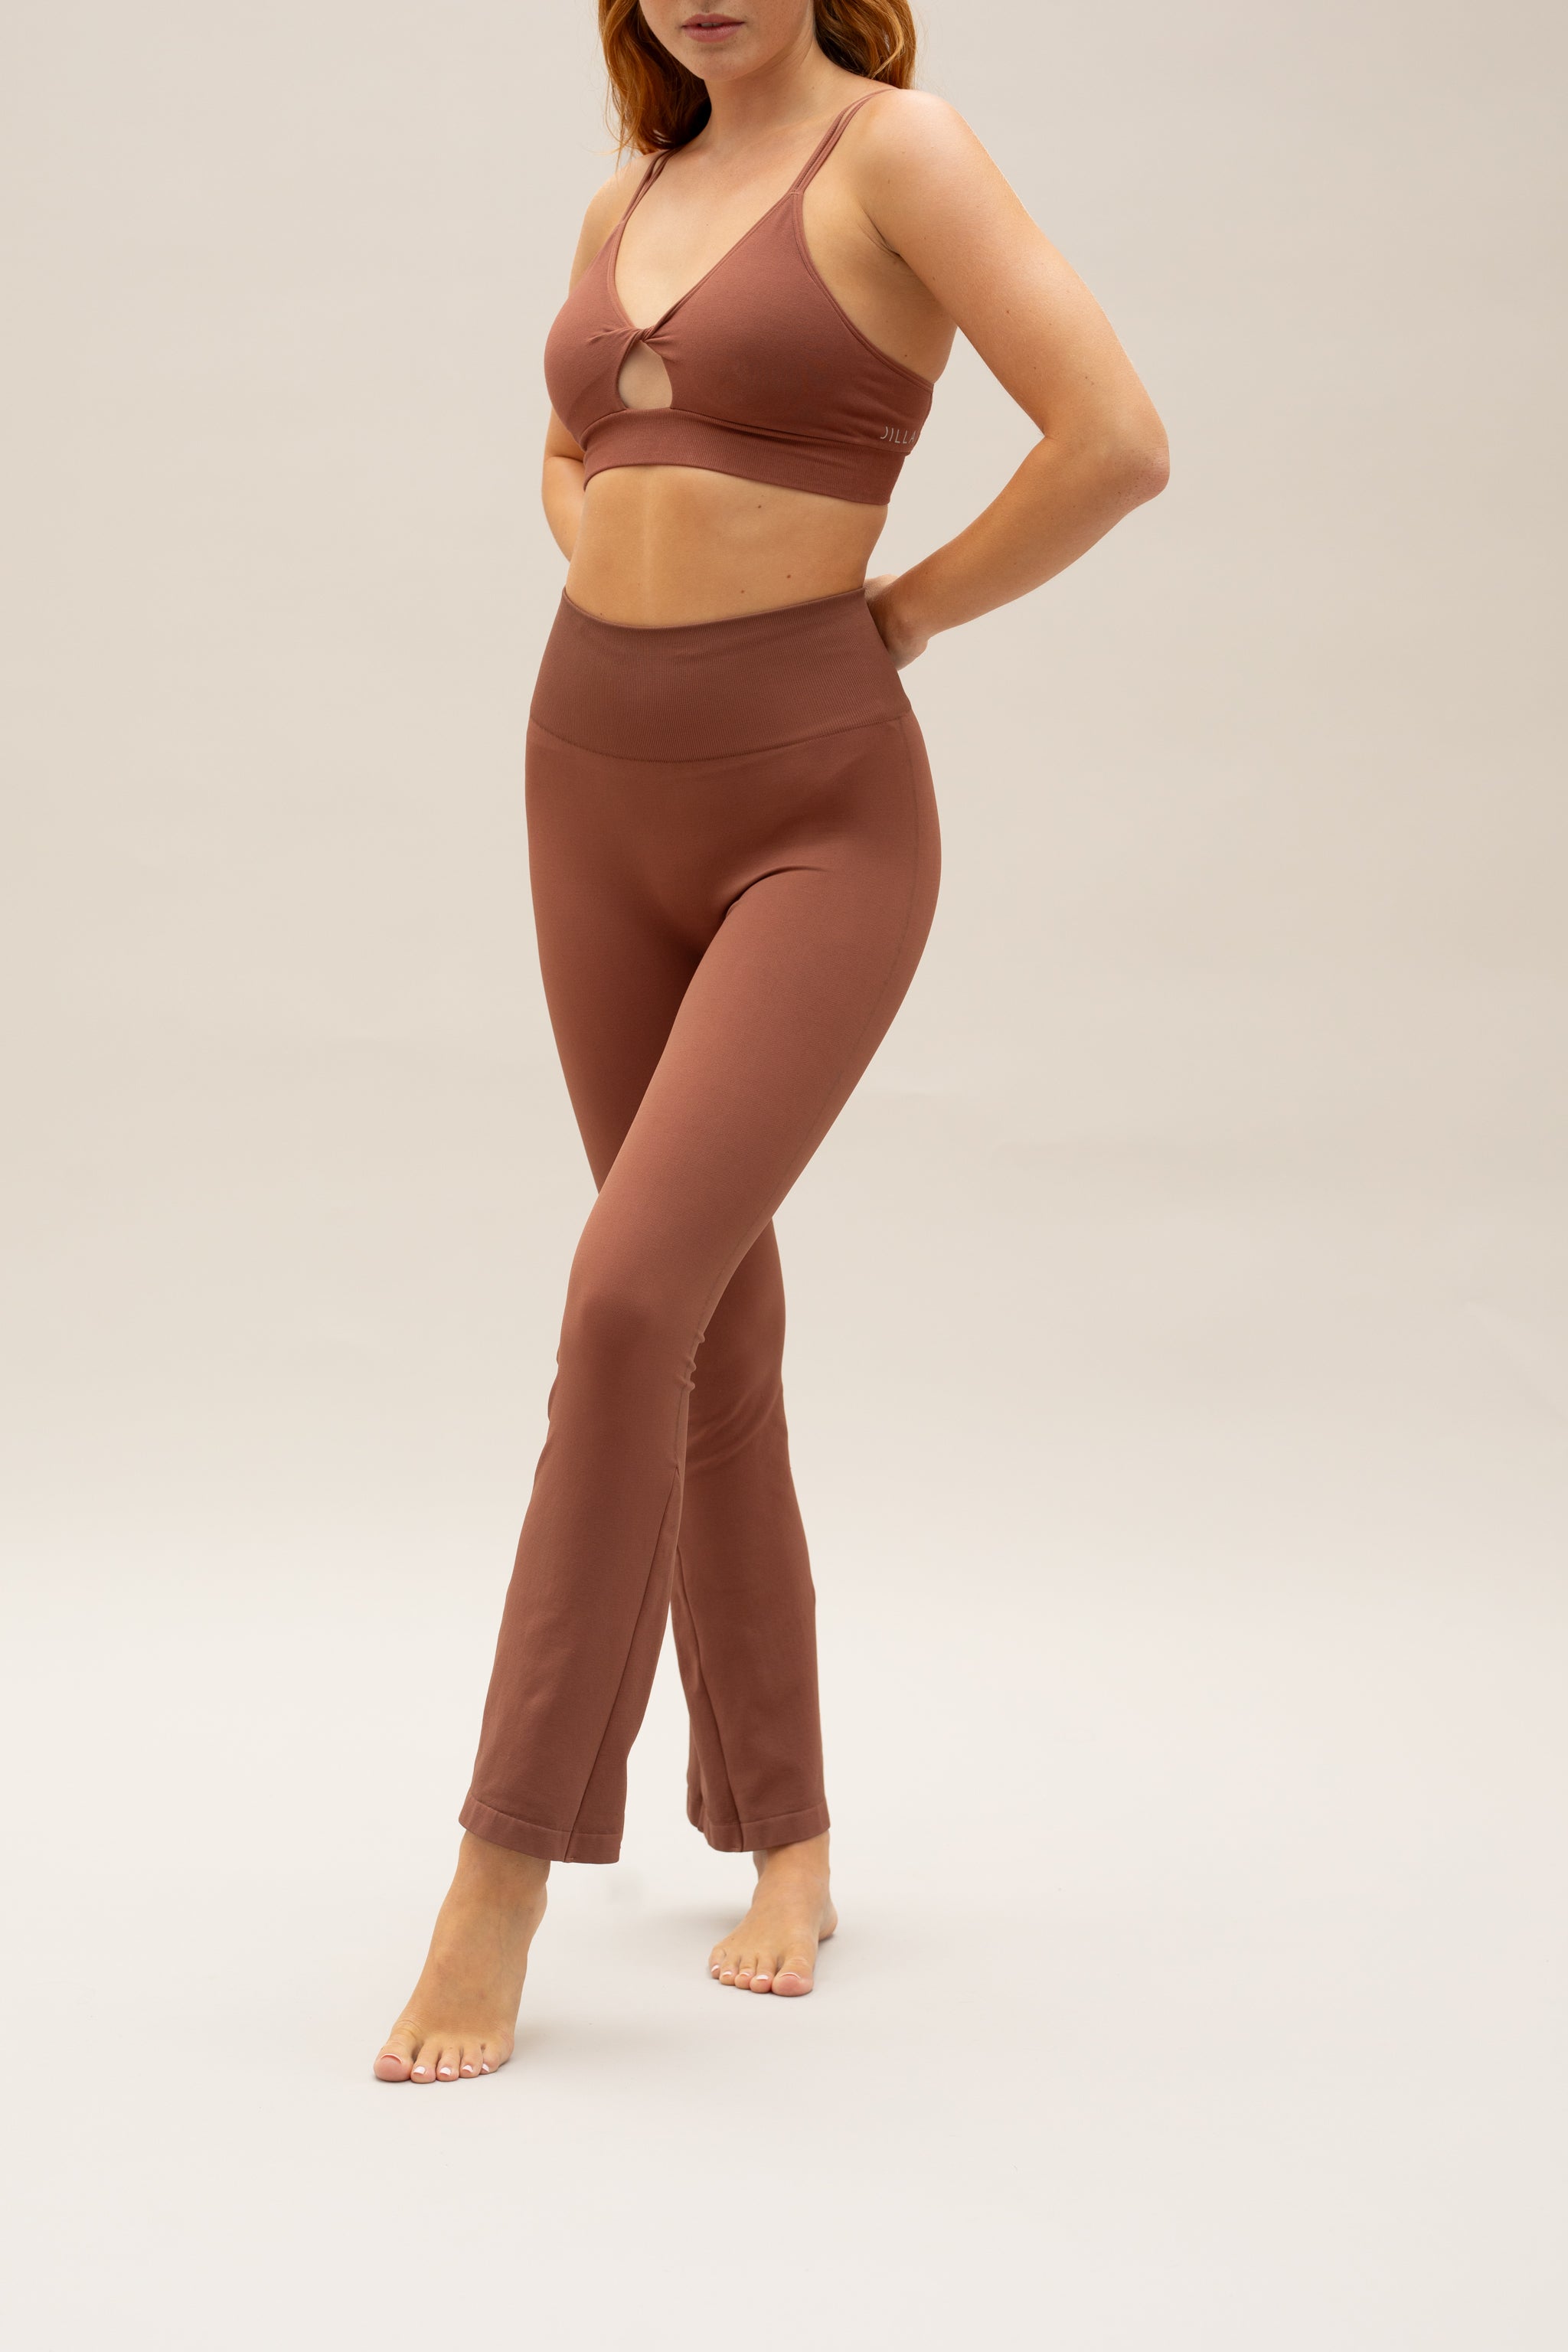 Cinnamon flare leggings with Cinnamon supportive sports bra by sustainable women's activewear brand, Jilla.